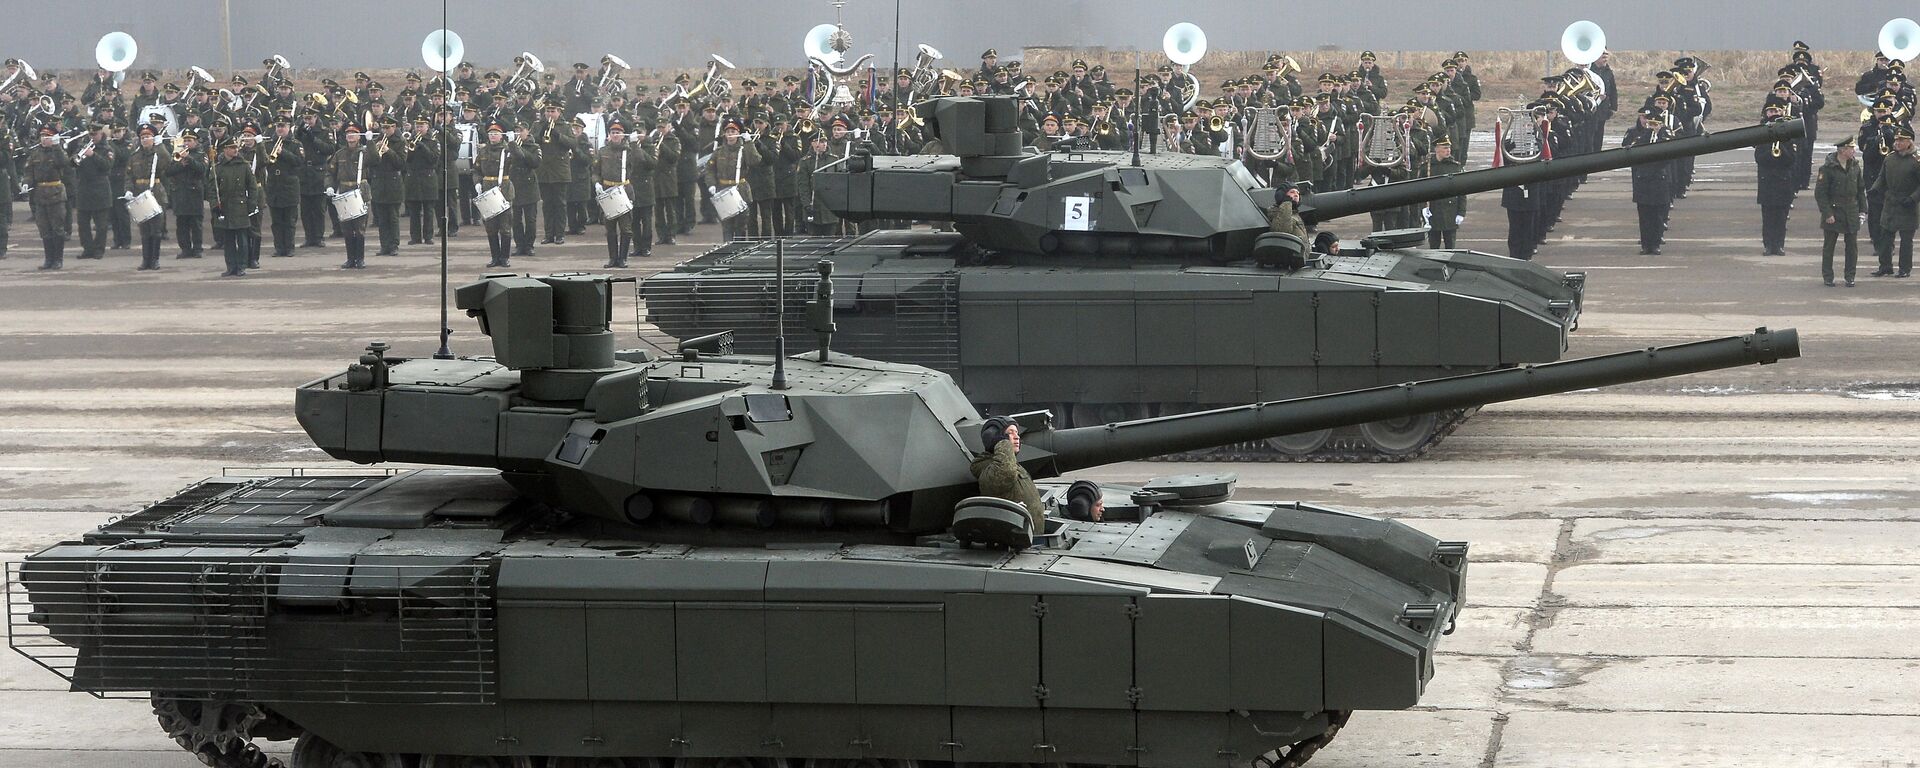 T-14 Armata tank of the Central Military District's Moscow Garrison during a rehearsal for the military parade to mark the 71st anniversary of victory in the Great Patriotic War, at Alabino training field in the Moscow Region - Sputnik International, 1920, 19.04.2020